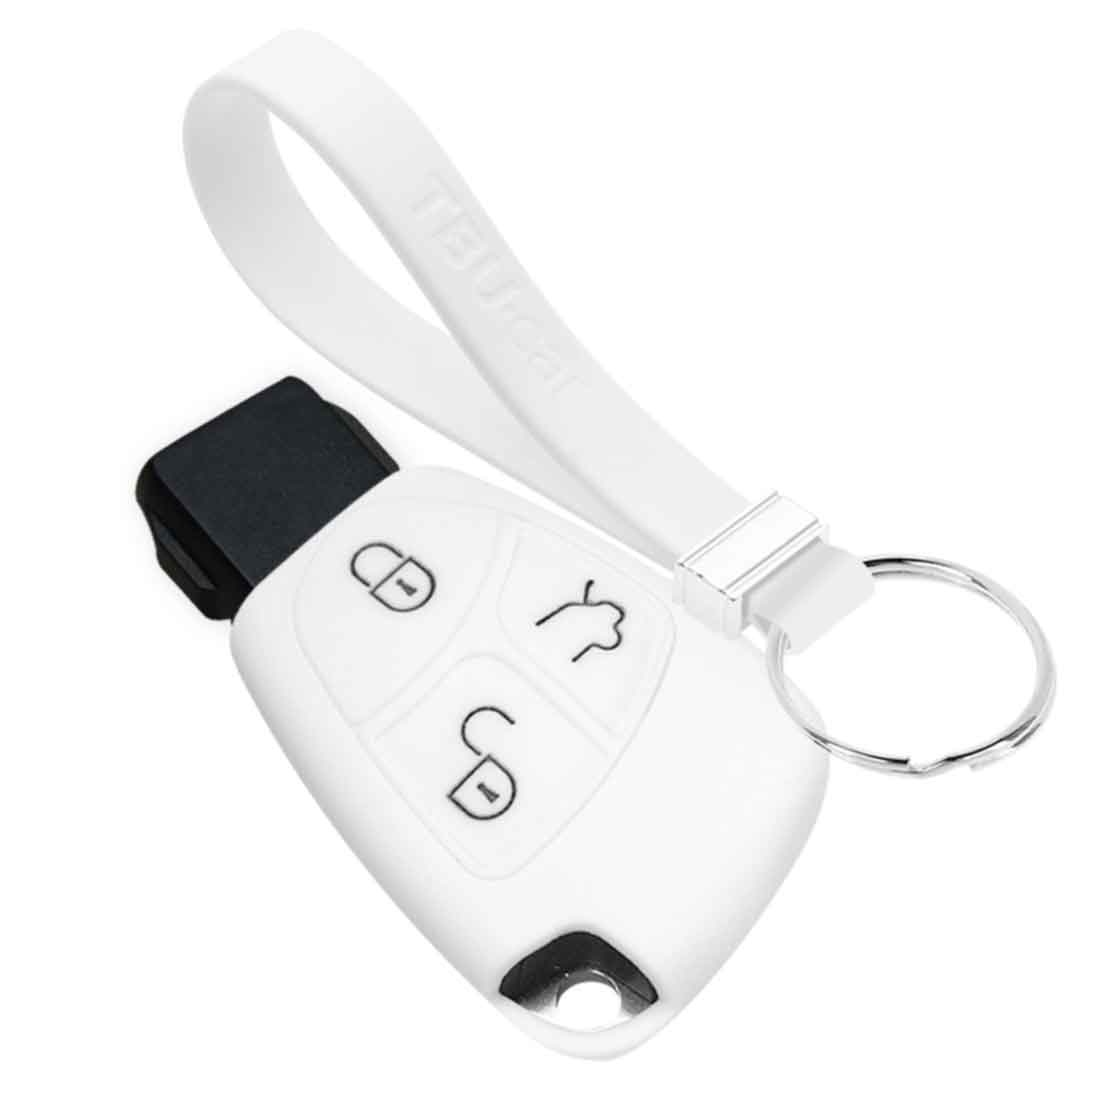 TBU car TBU car Car key cover compatible with Mercedes - Silicone Protective Remote Key Shell - FOB Case Cover - White